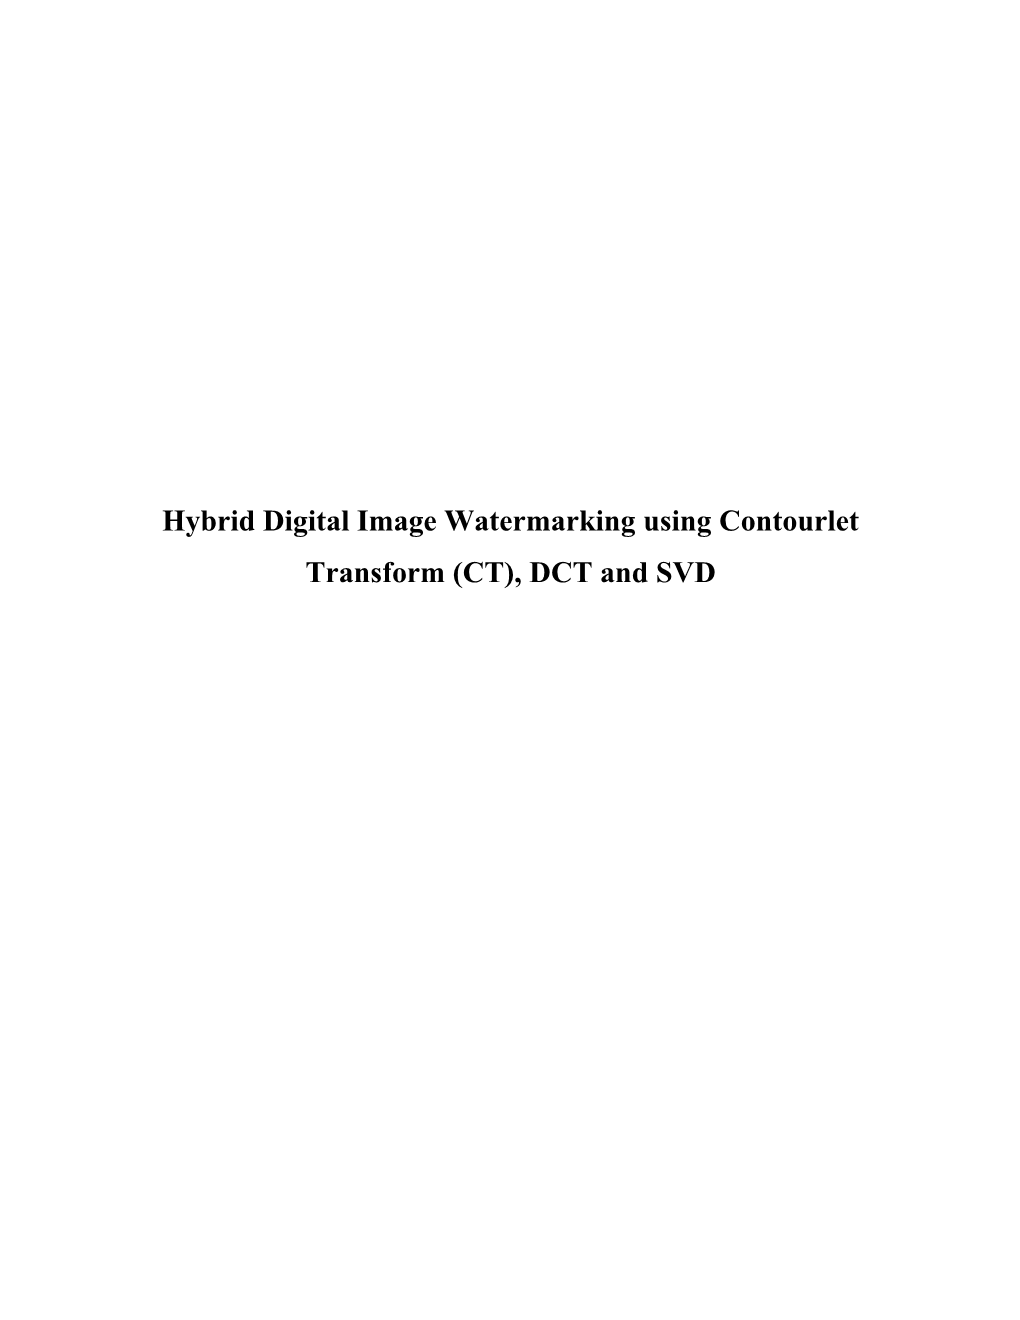 Hybrid Digital Image Watermarking Using Contourlet Transform (CT), DCT and SVD